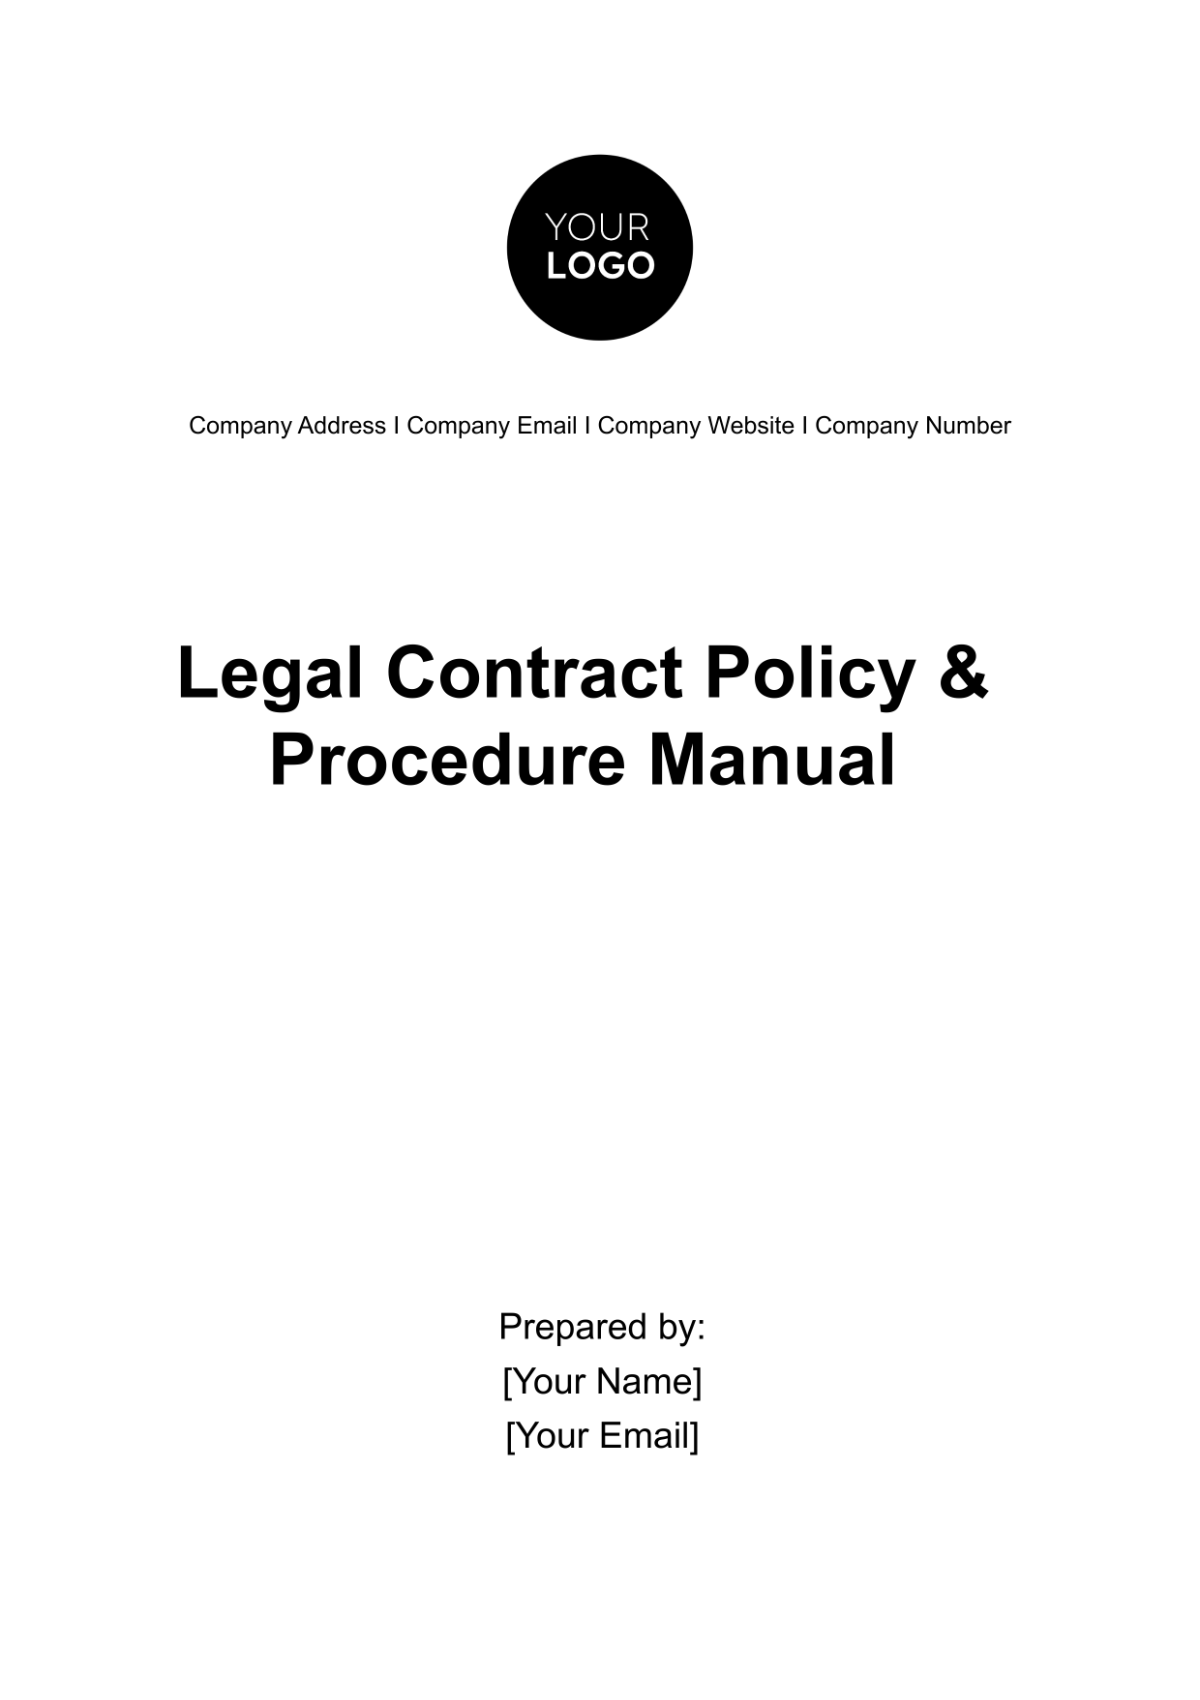 Legal Contract Policy & Procedure Manual Template